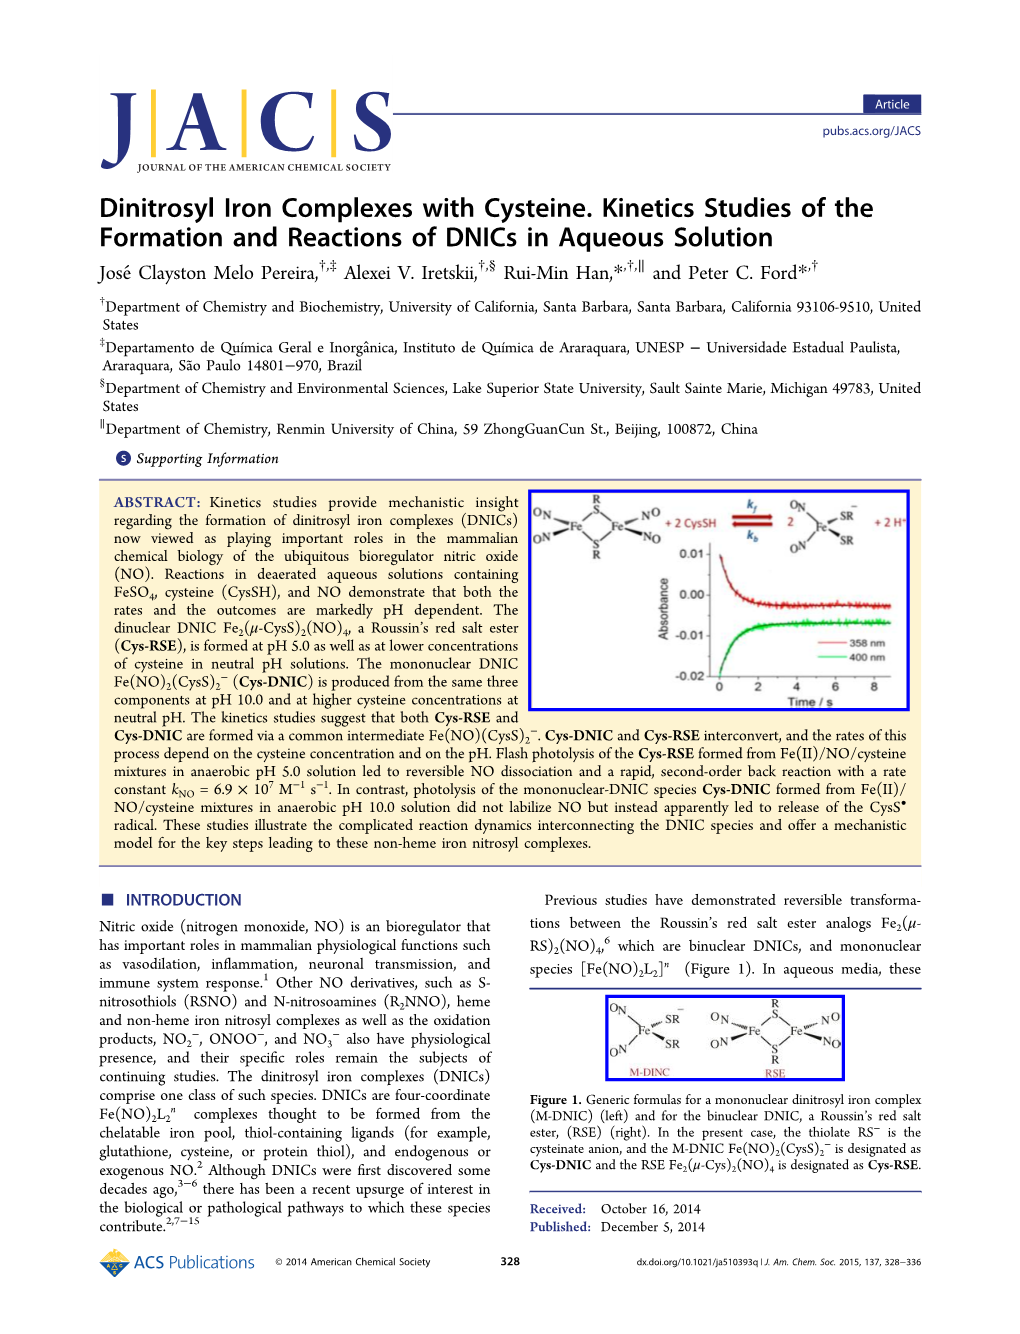 Dinitrosyl Iron Complexes with Cysteine. Kinetics Studies of the Formation and Reactions of Dnics in Aqueous Solution Joséclayston Melo Pereira,†,‡ Alexei V